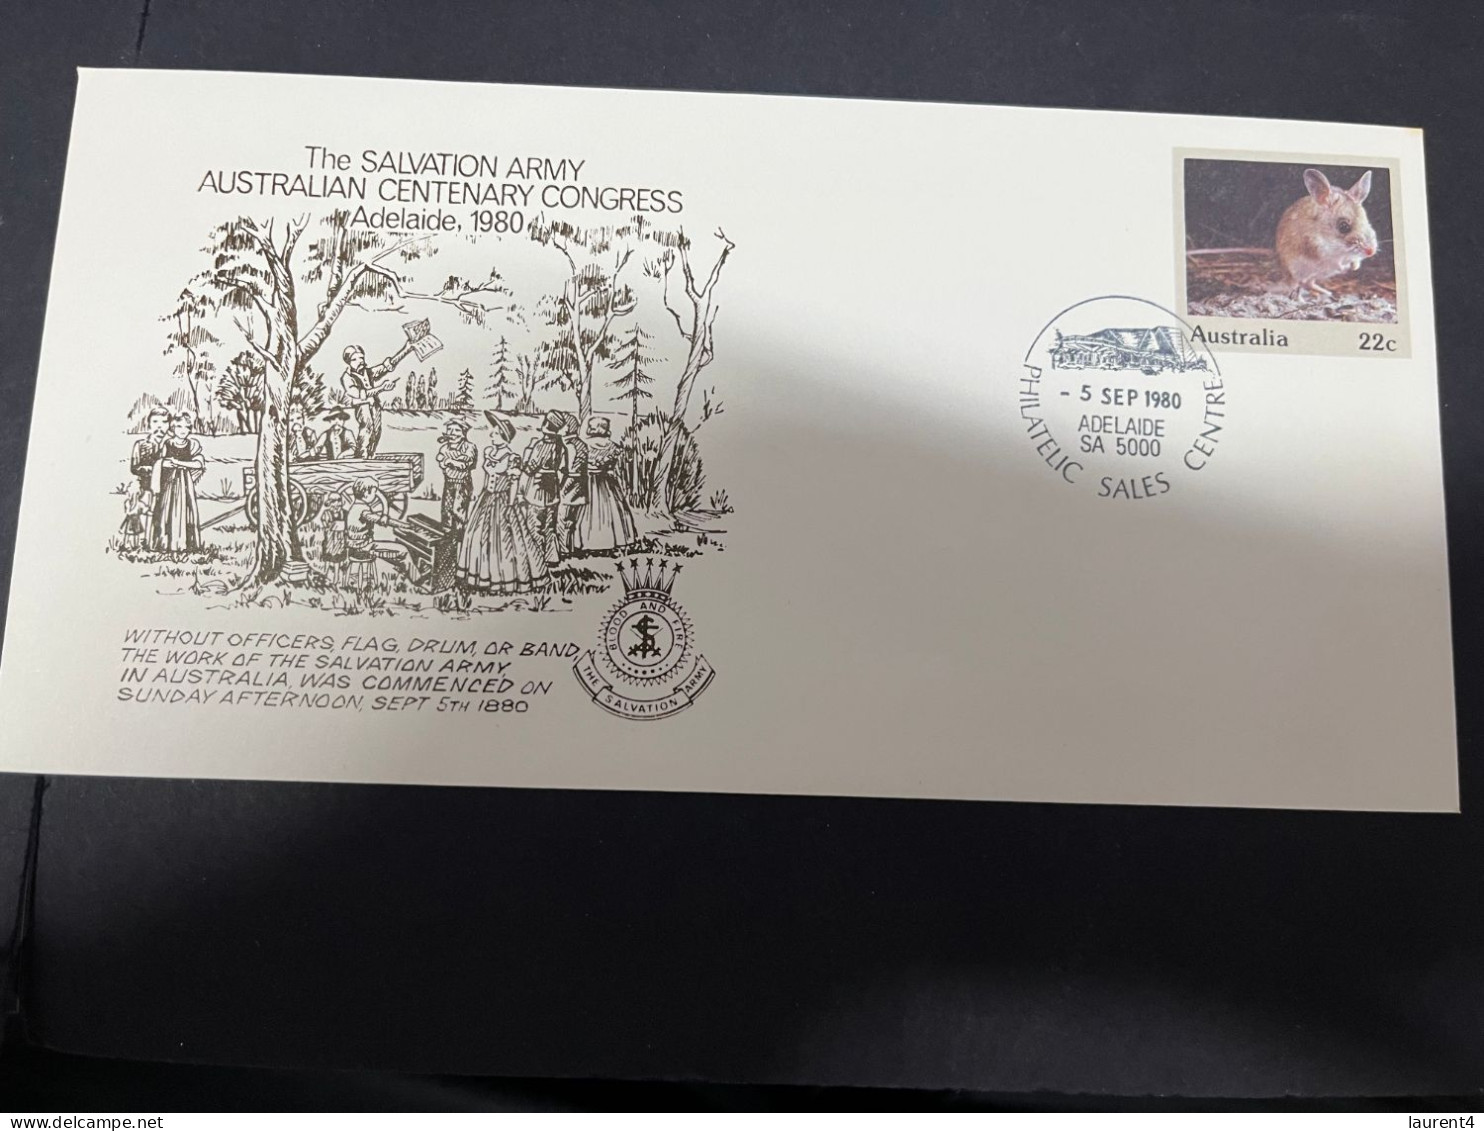 30-4-2023 (3 Z 29) Australia FDC (1 Covers) 1980- Salvation Army Australian Centenary Congress In Adelaide - FDC